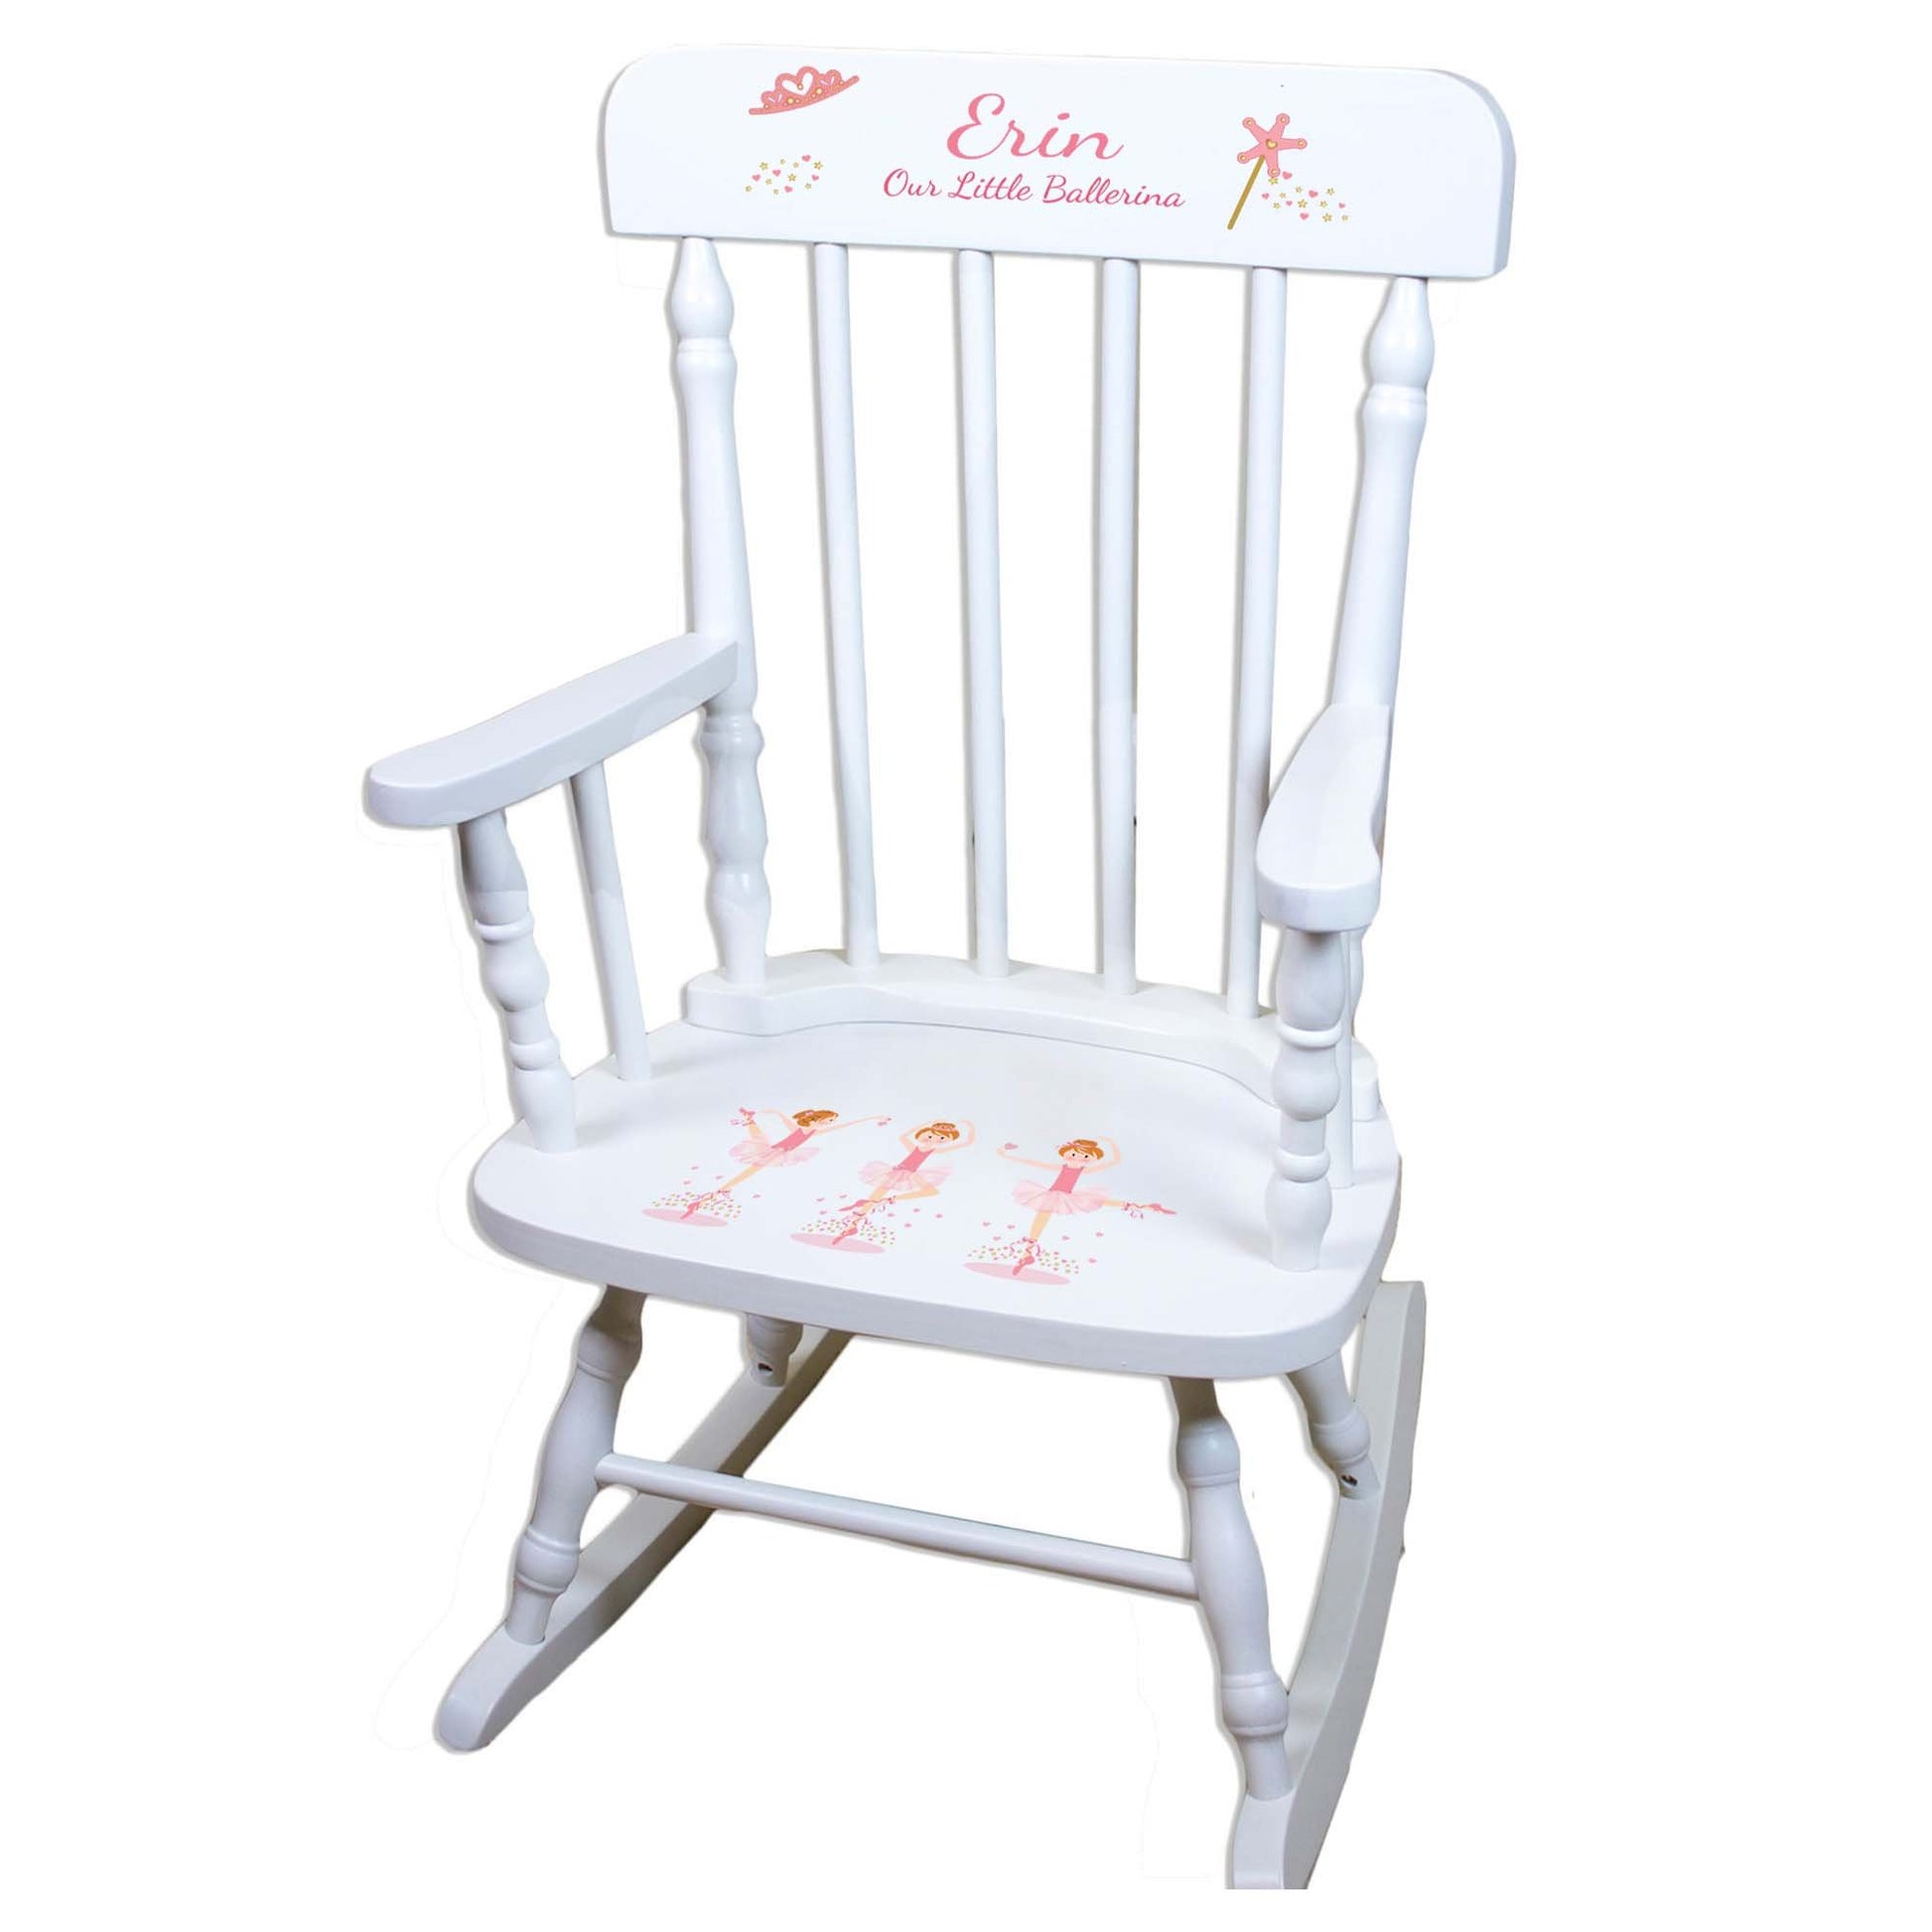 Brunette Ballerina White Personalized Wooden ,rocking chairs